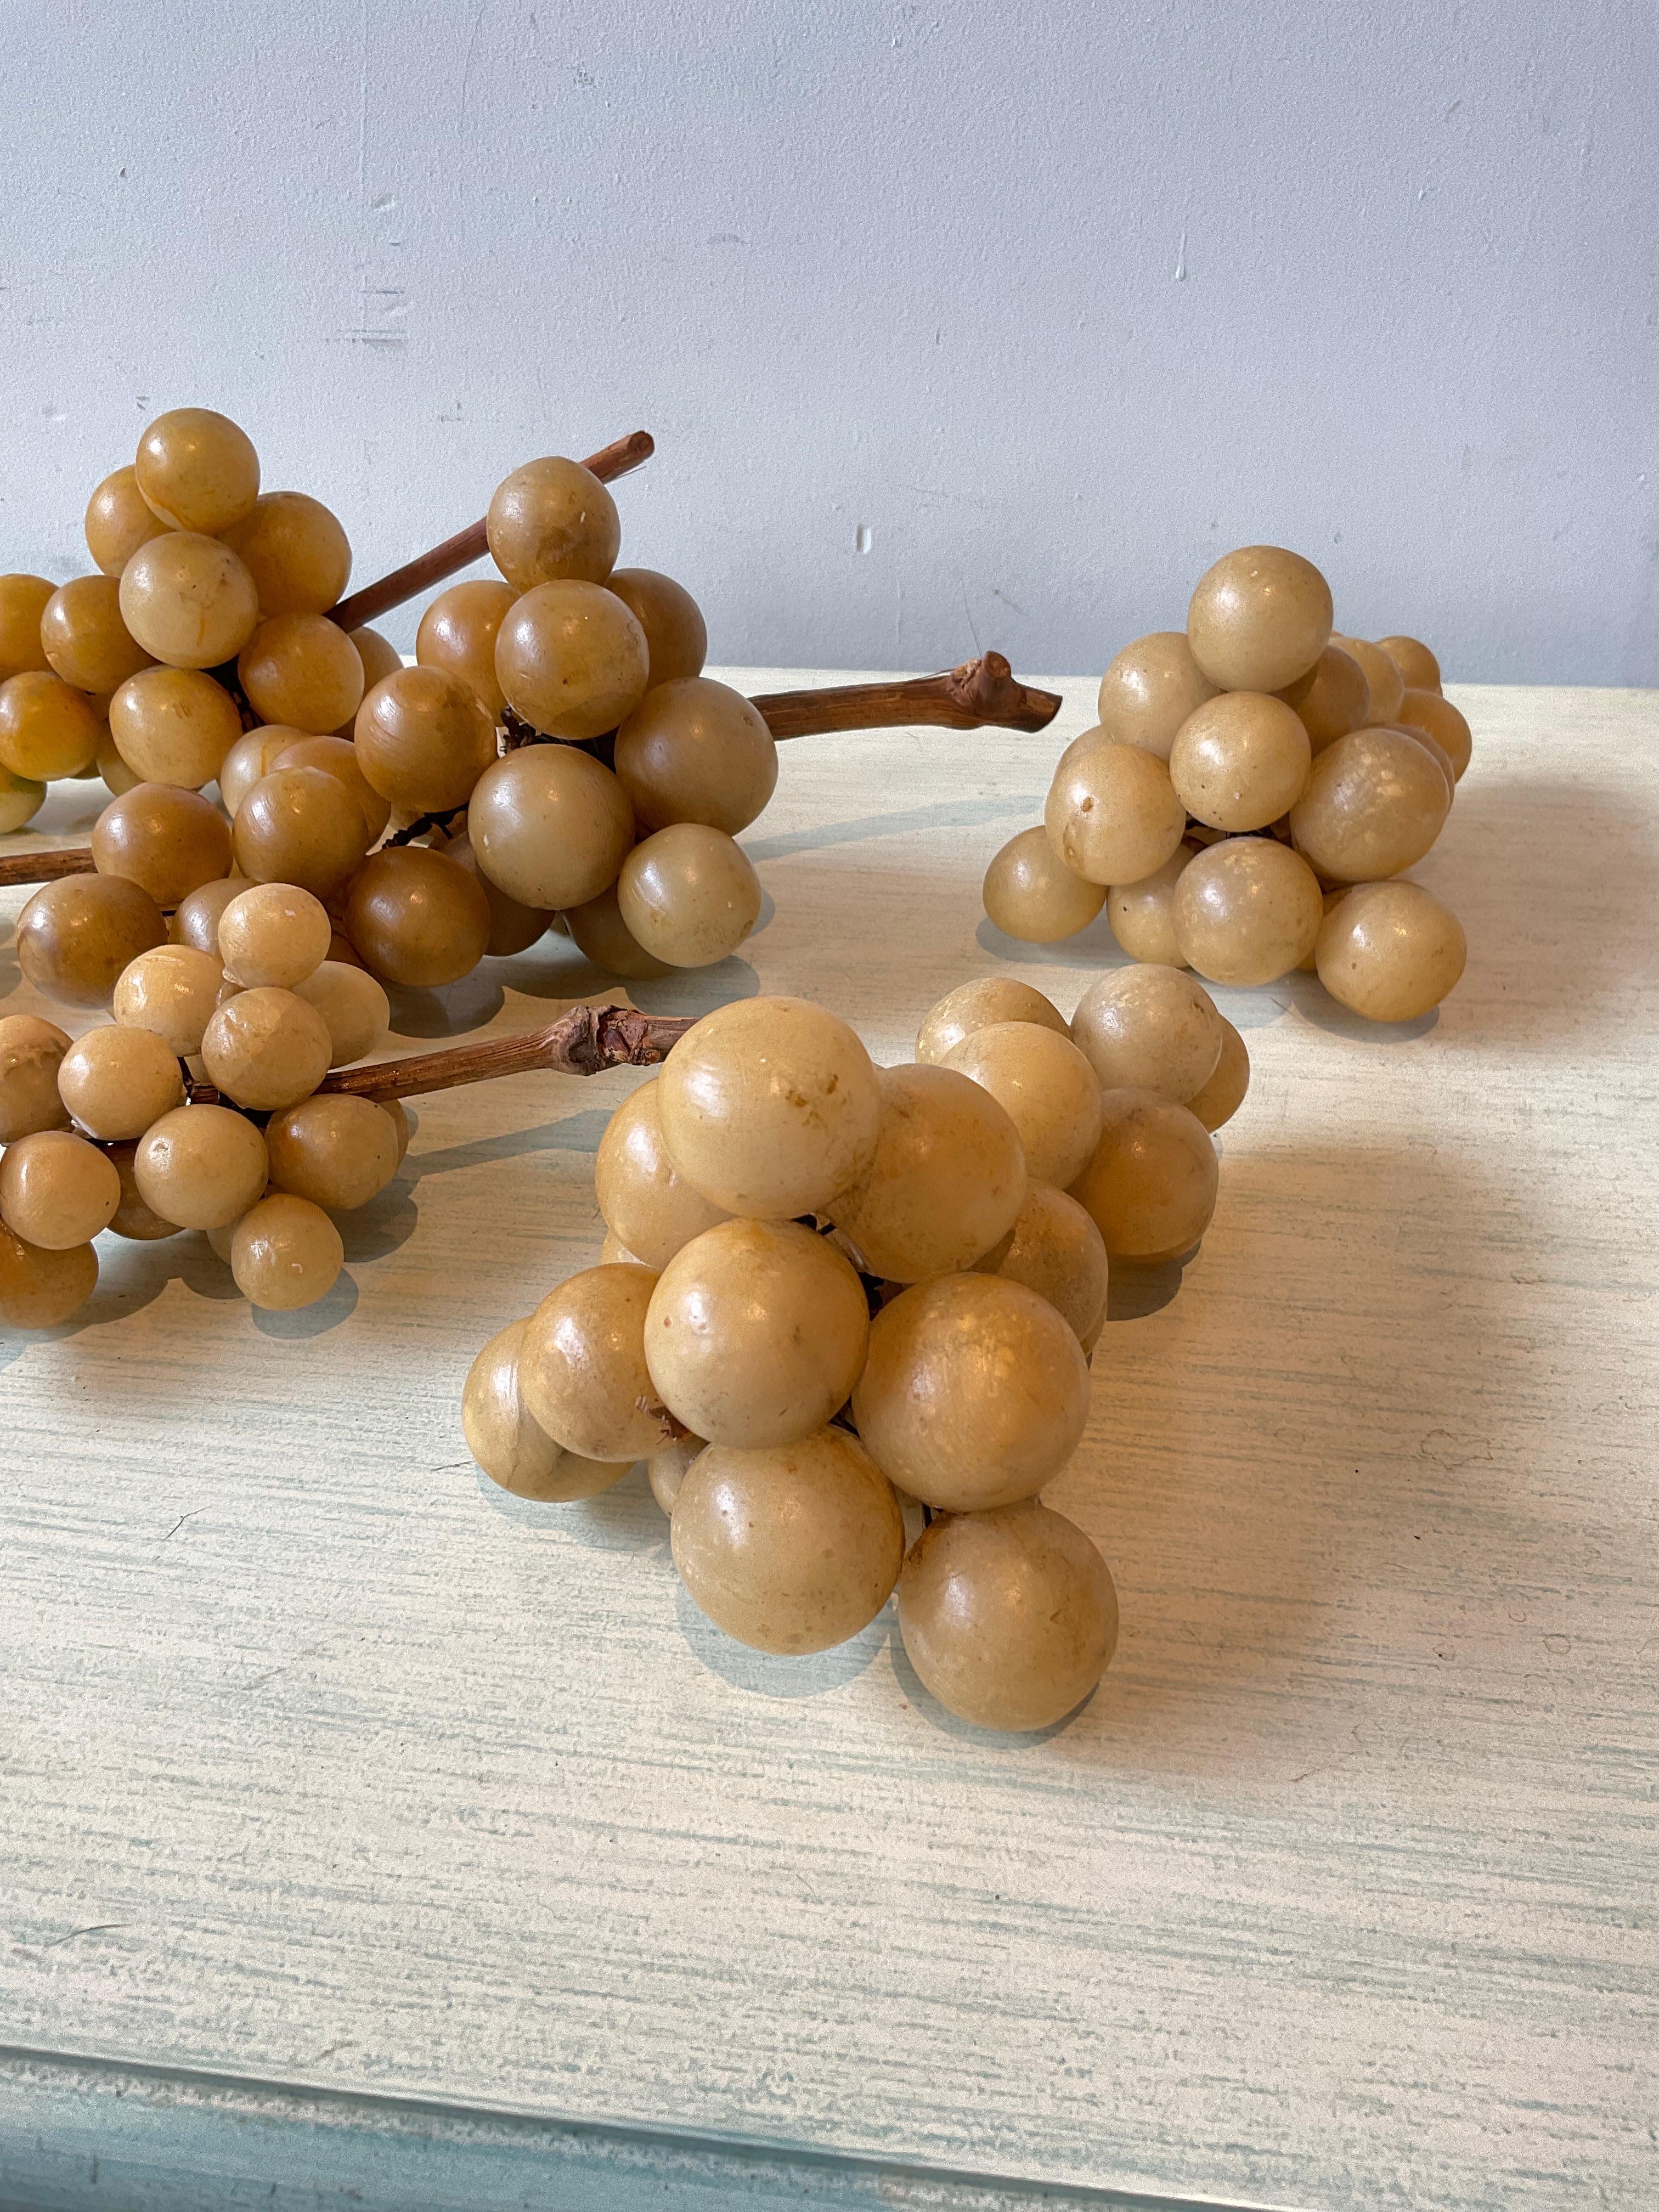 6 Clusters of marble grapes. One cluster has no stem, one cluster has the stem but it’s broken off.